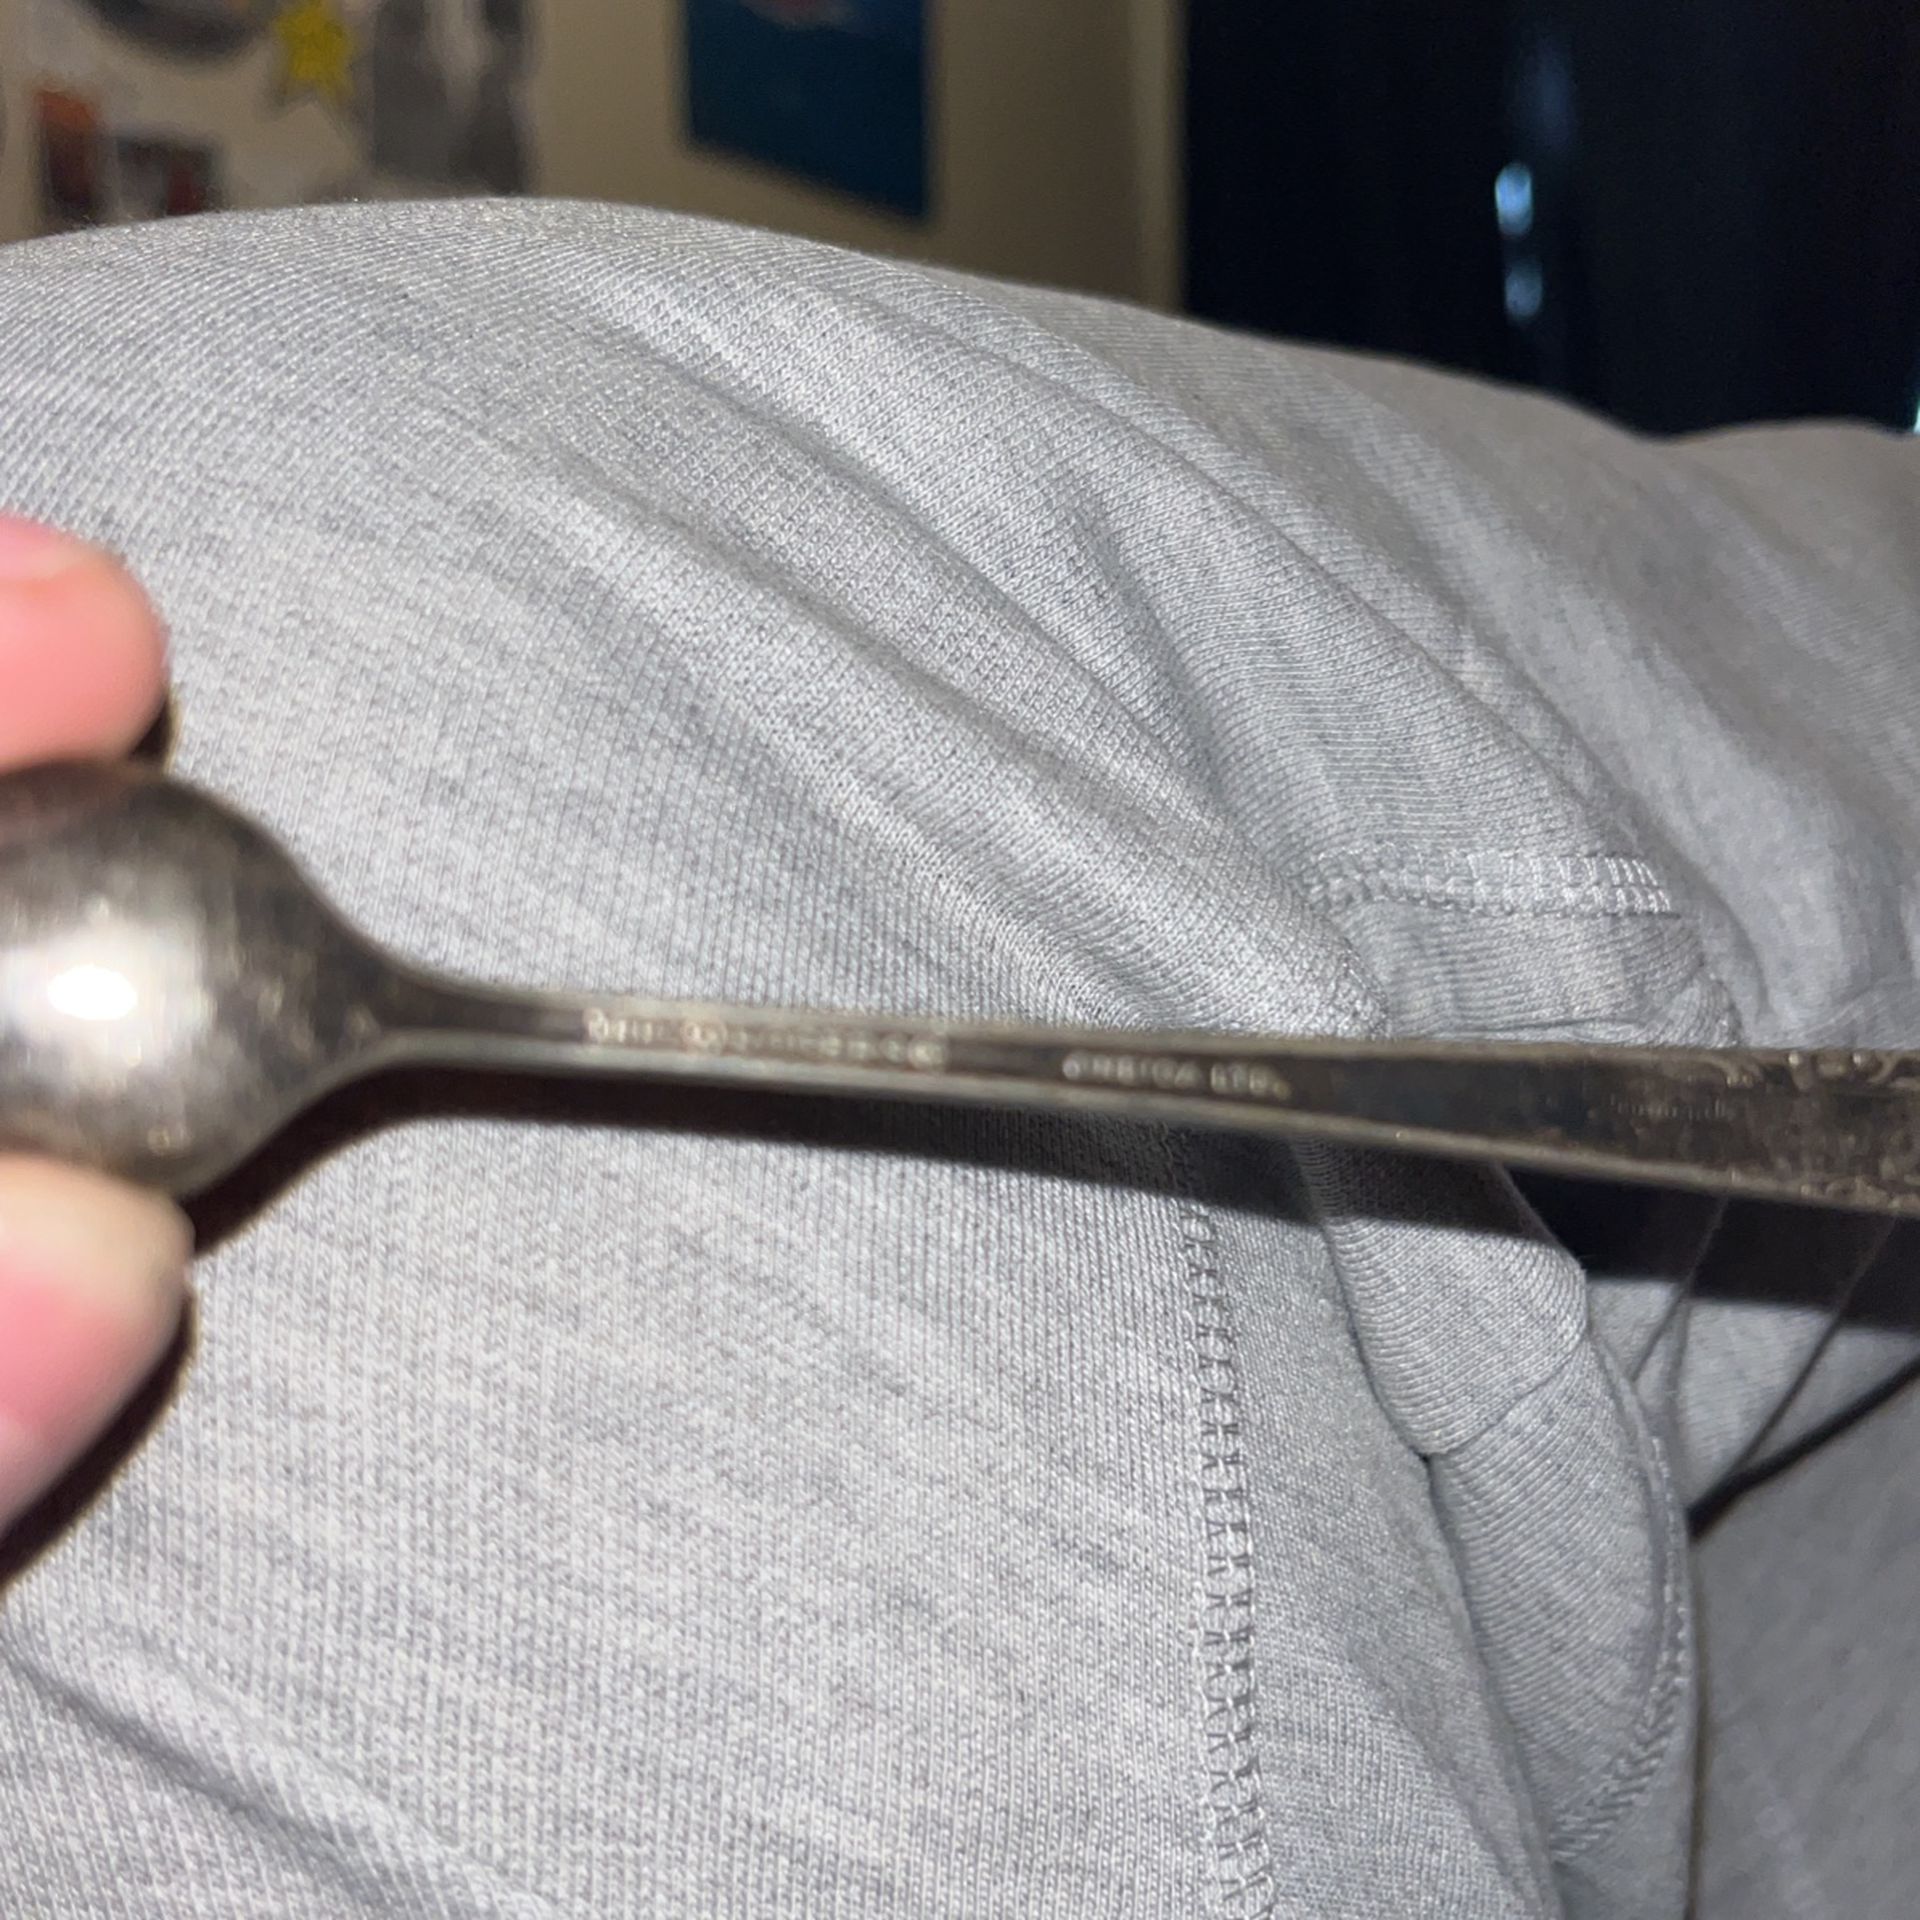 Old Spoon 